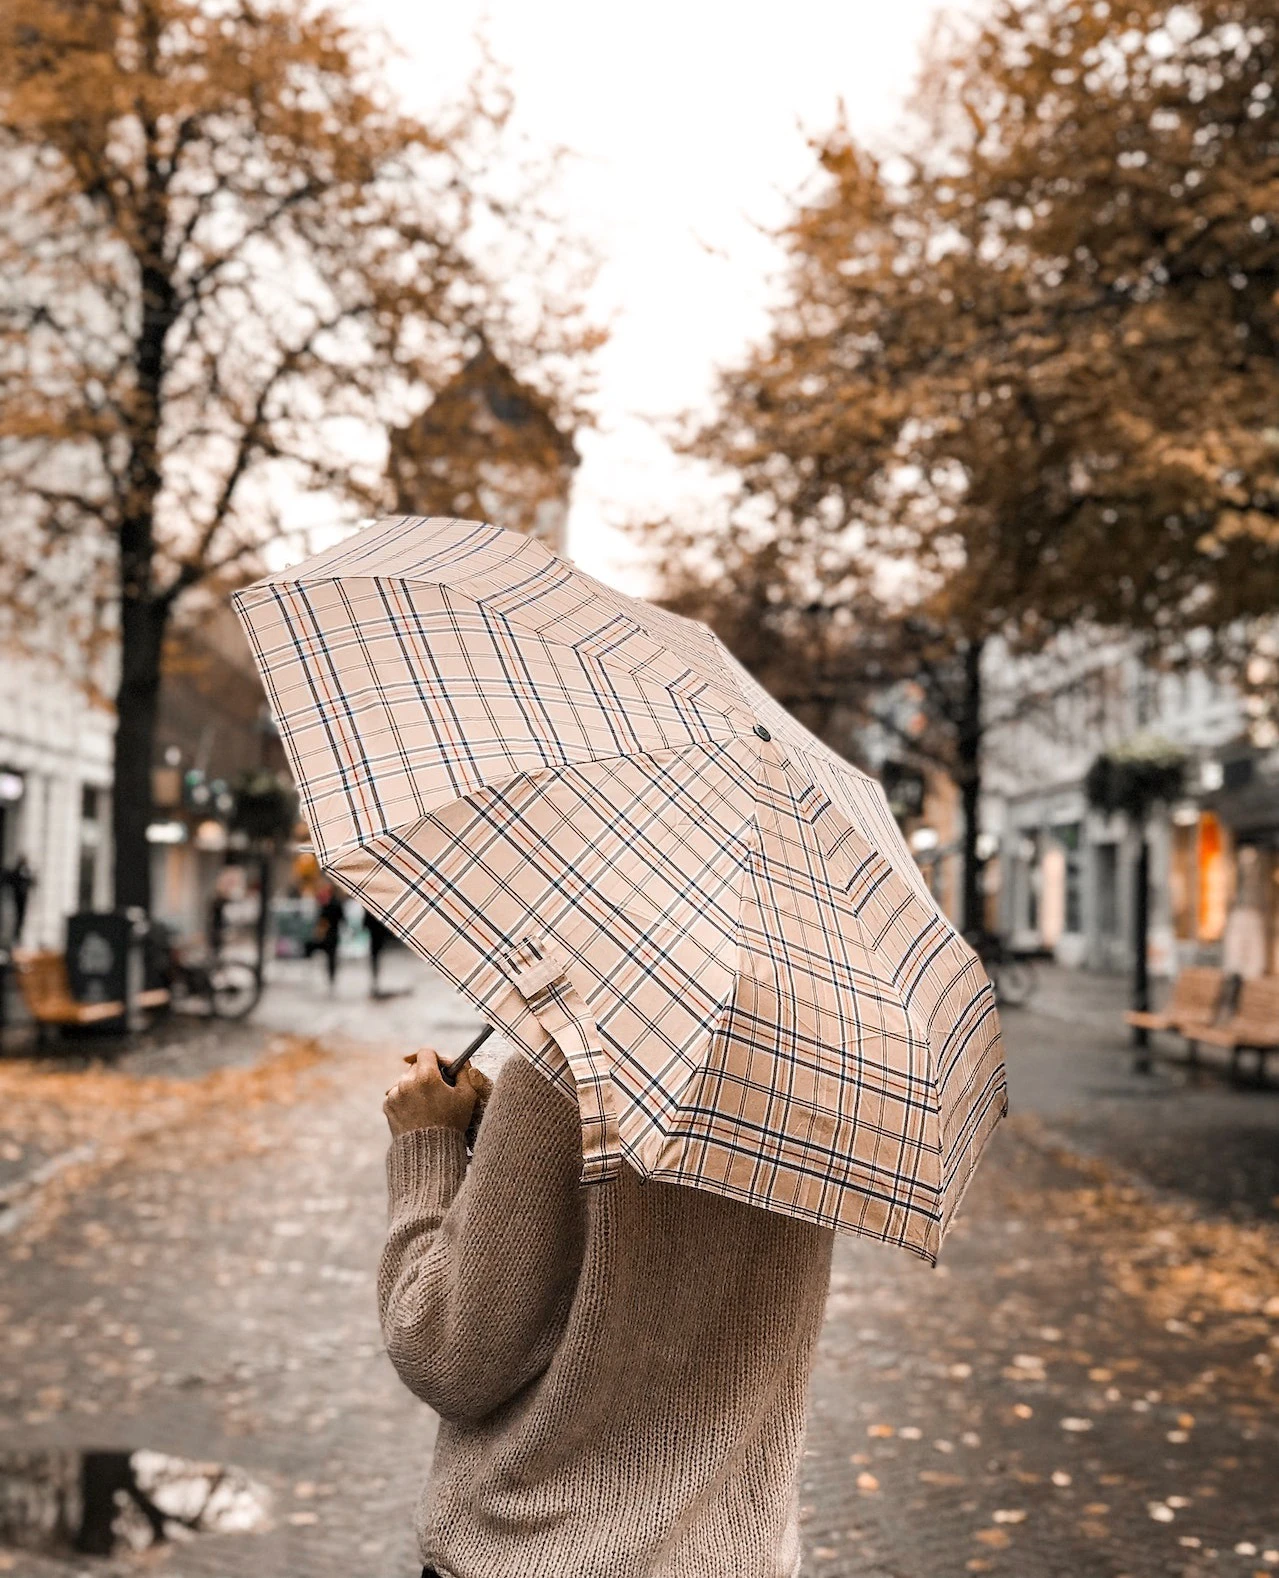 Person holding an umbrella during a rainy day